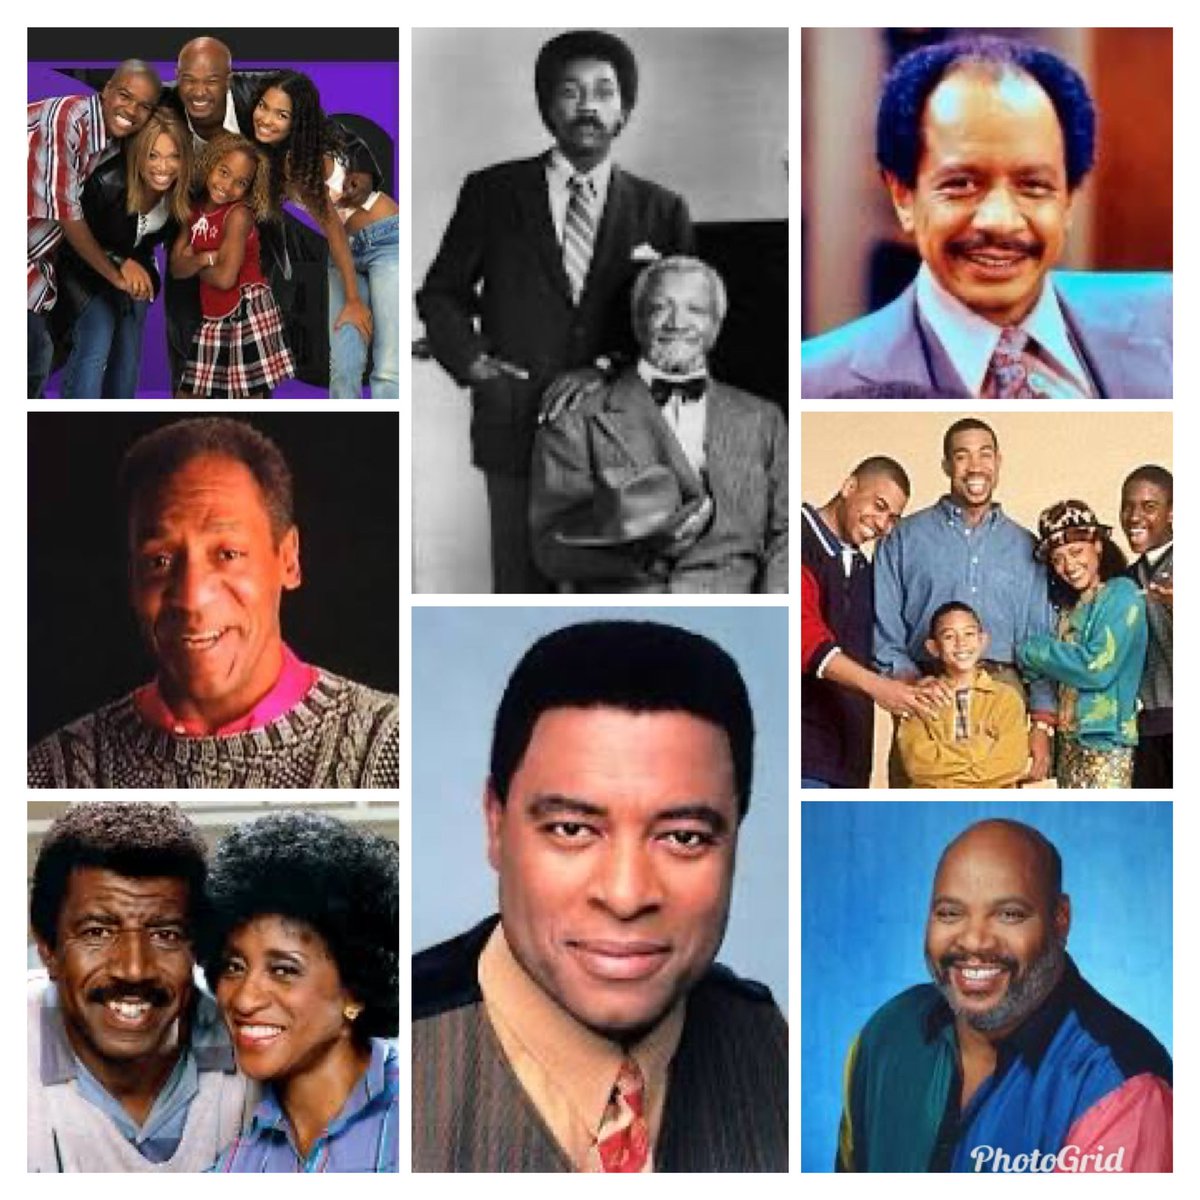 @TorraineWalker I’m old enough to remember when being a businessman or a professional was the prerequisite for black TV dads. These black men would be classified as c00ns by a lot of people in the generation coming up today! I saw a thread on this a few years ago